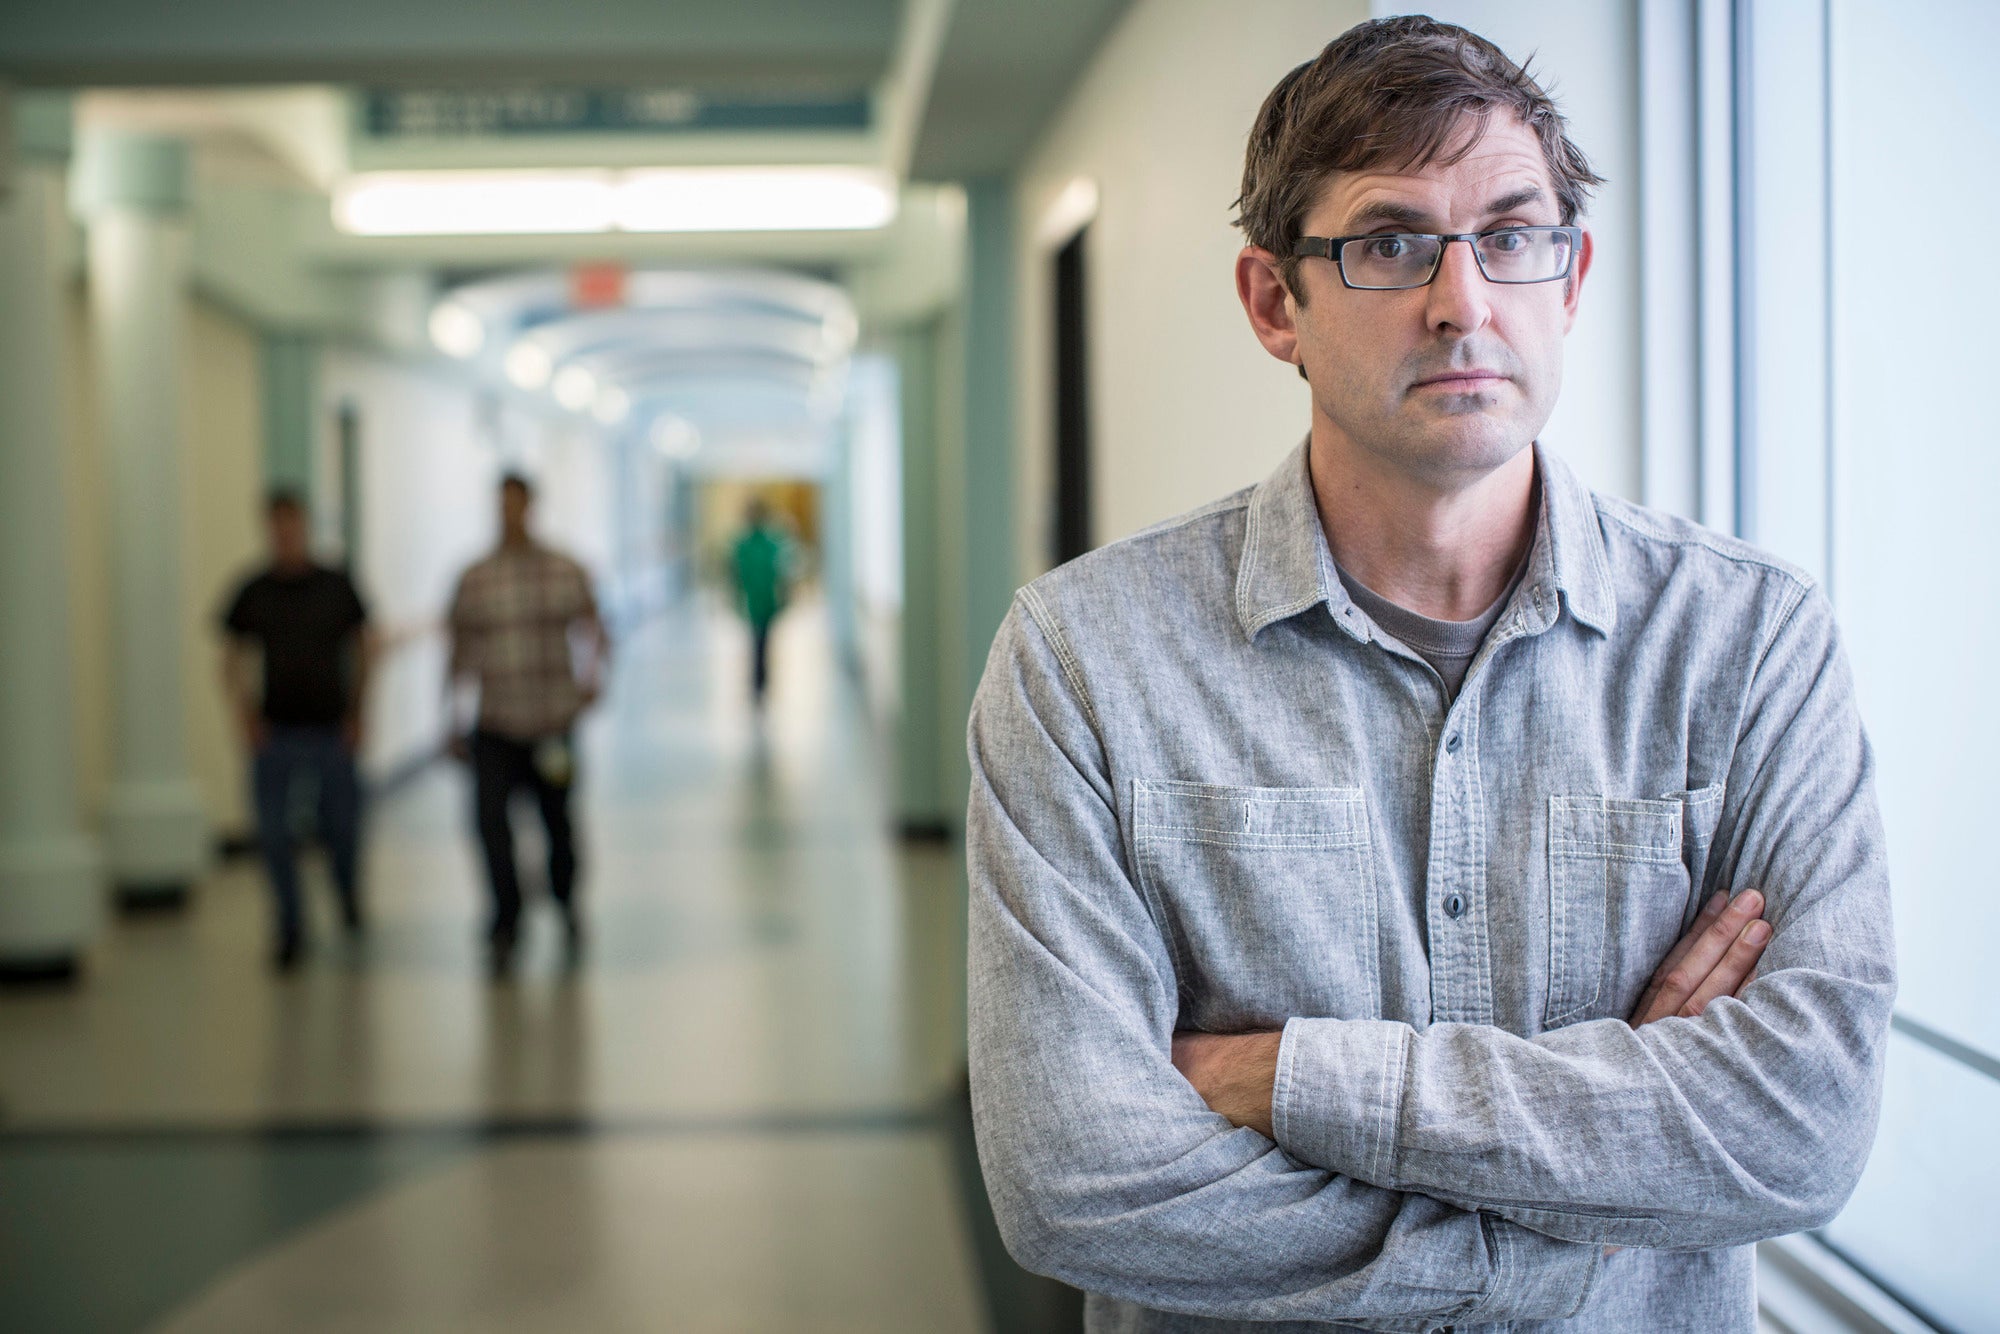 Louis Theroux in his By Reason of Insanity programme at Summit Behavioral Healthcare Hospital, Cincinnati, Ohio.